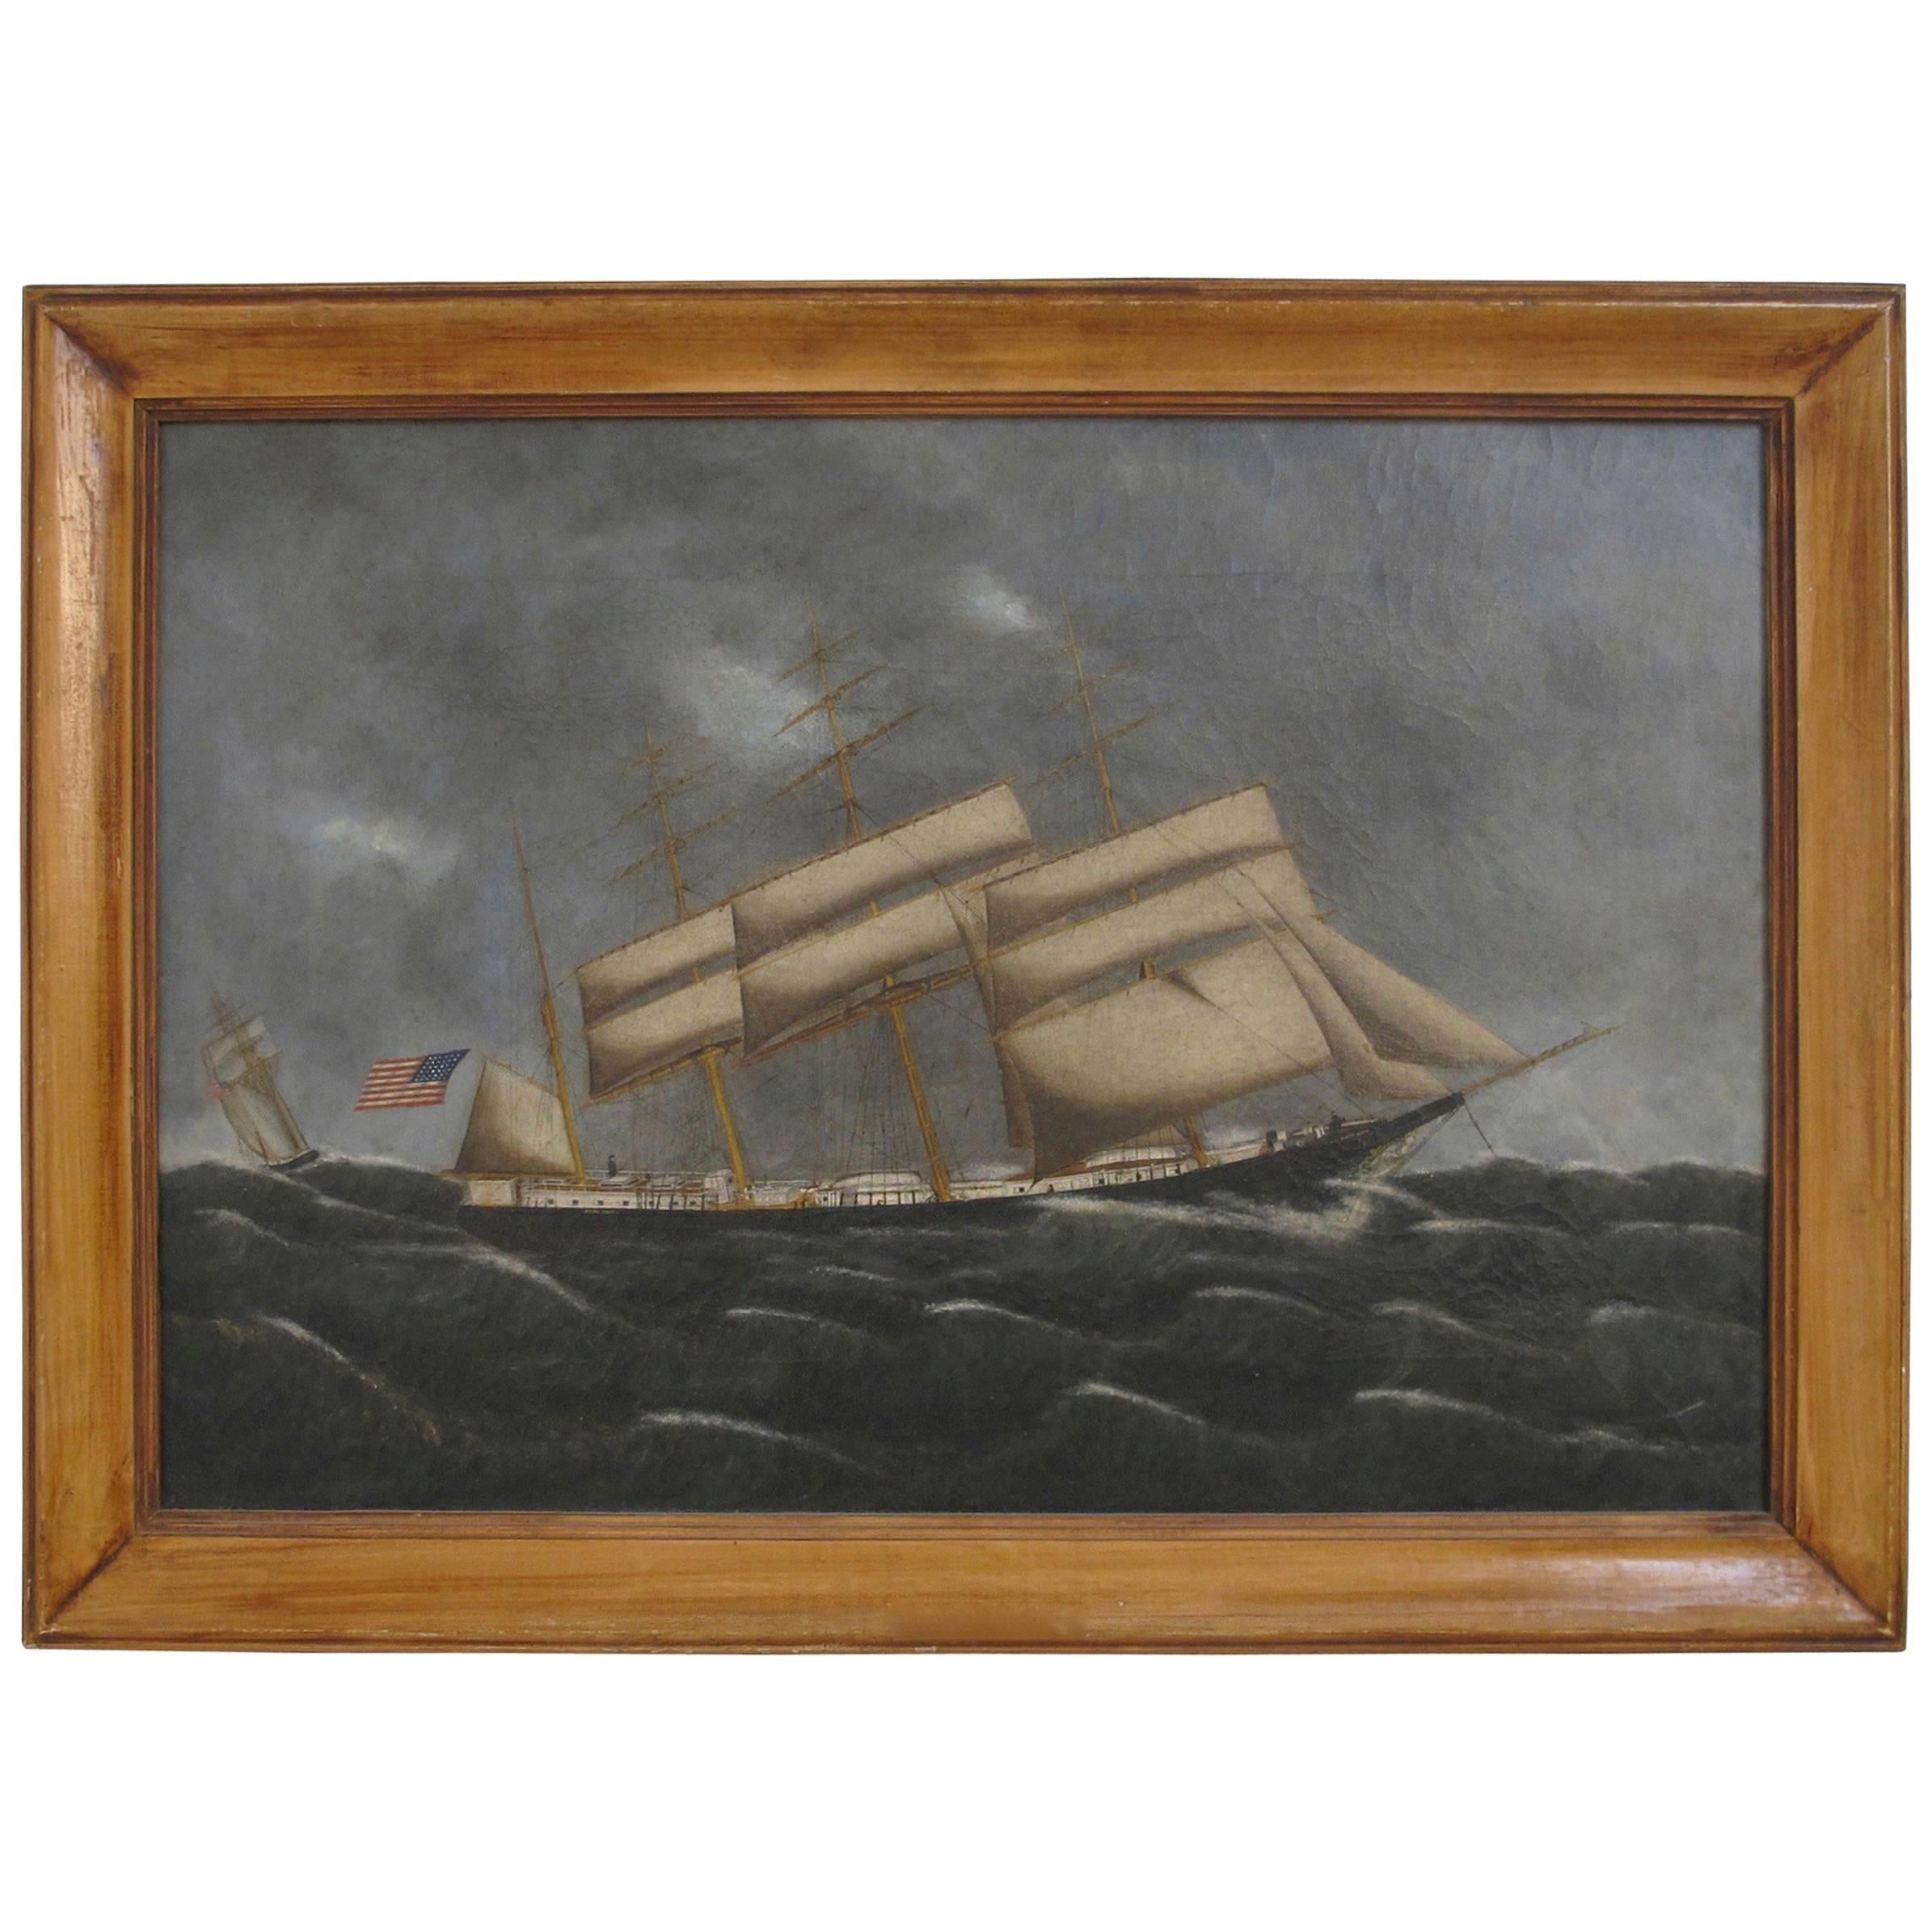 American Ship Oil Painting, 19th Century Maritime